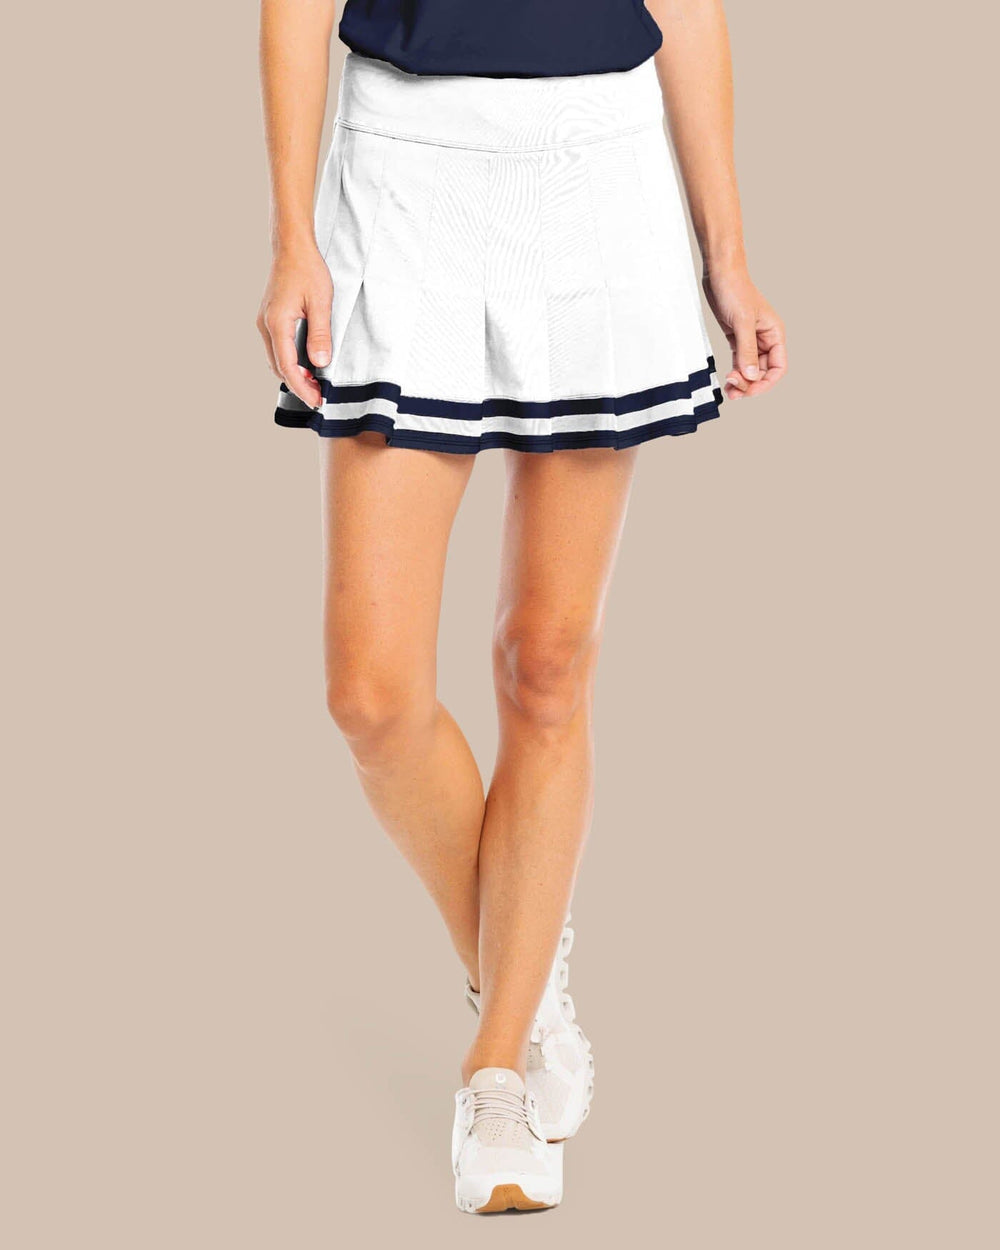 The front view of the Southern Tide Gwen Pleated Performance Skort by Southern Tide - Classic White